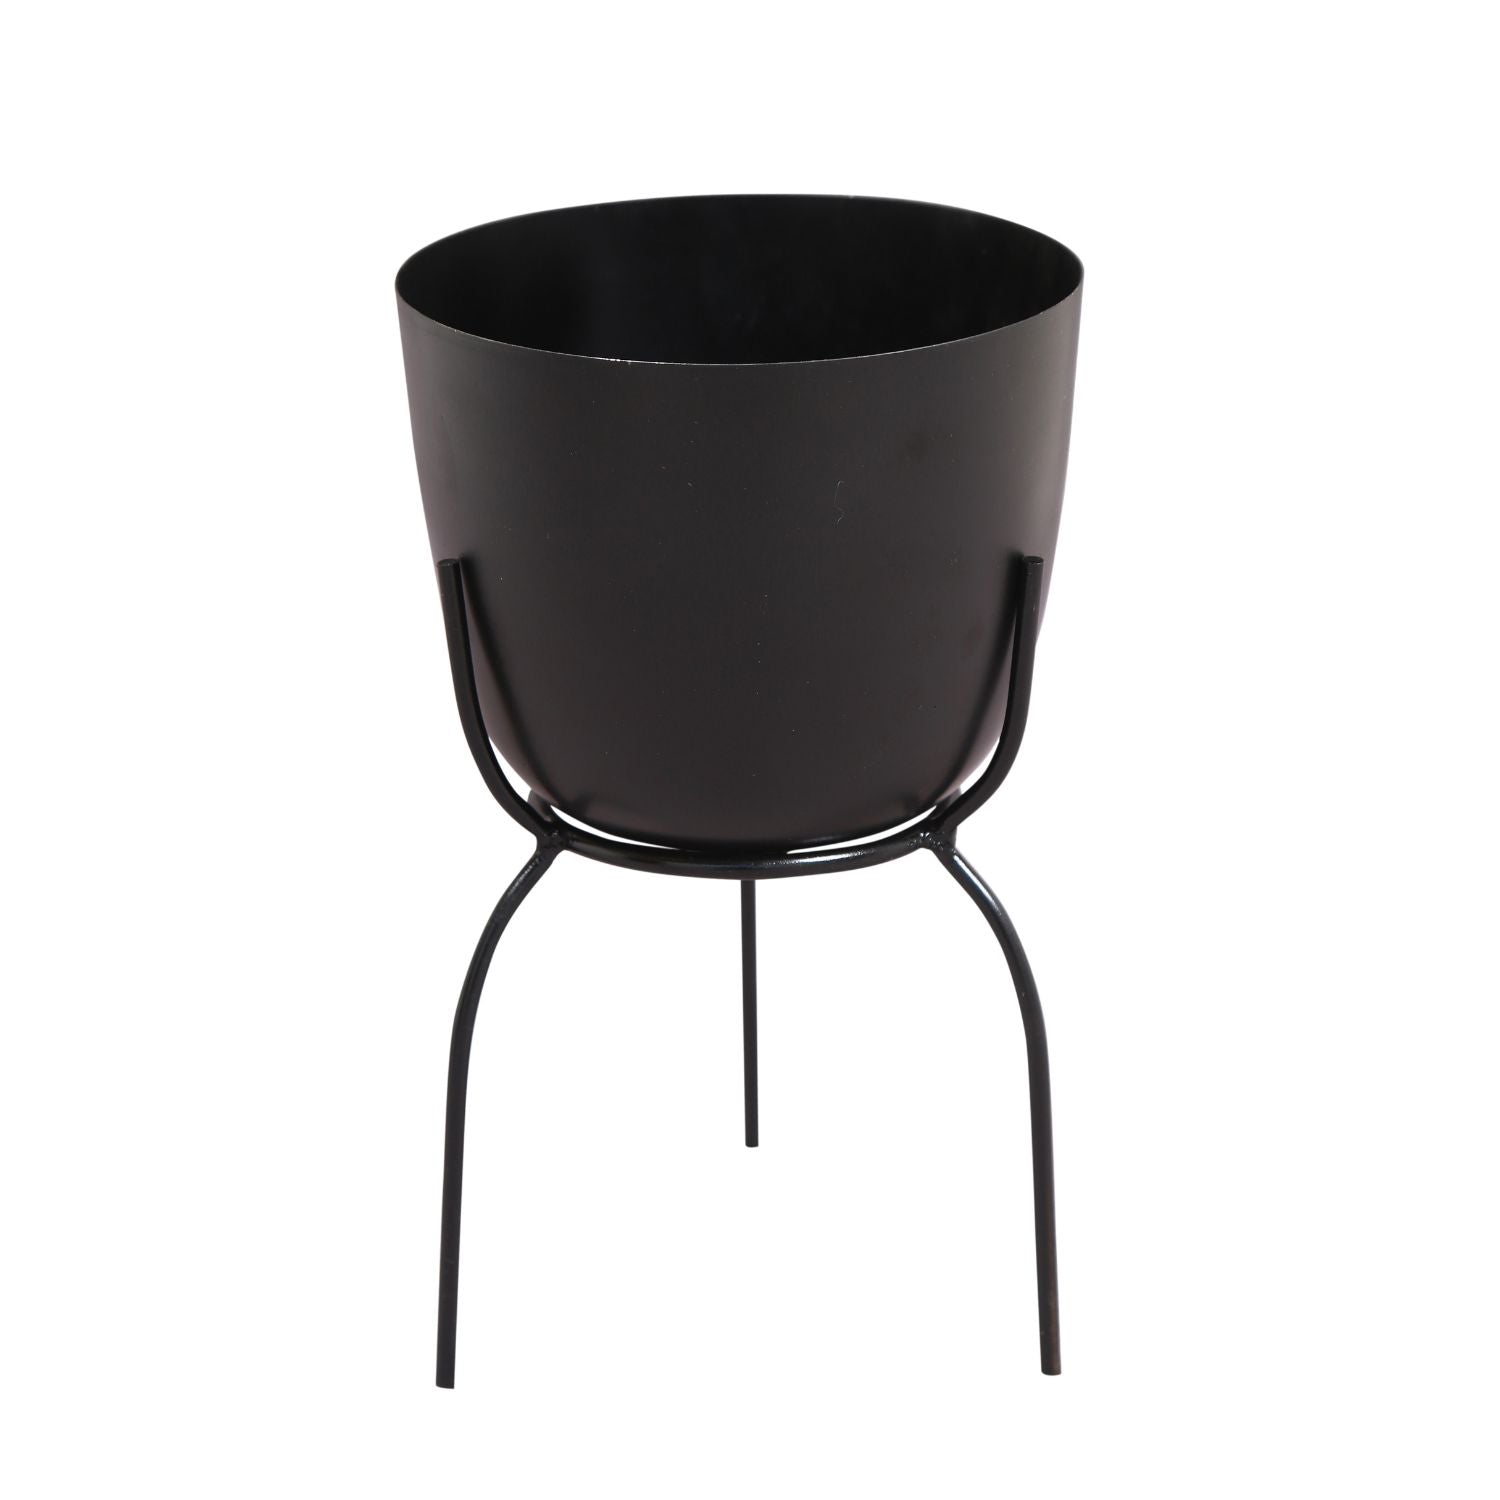 Black Metal Planter with Stand 12 inches tall